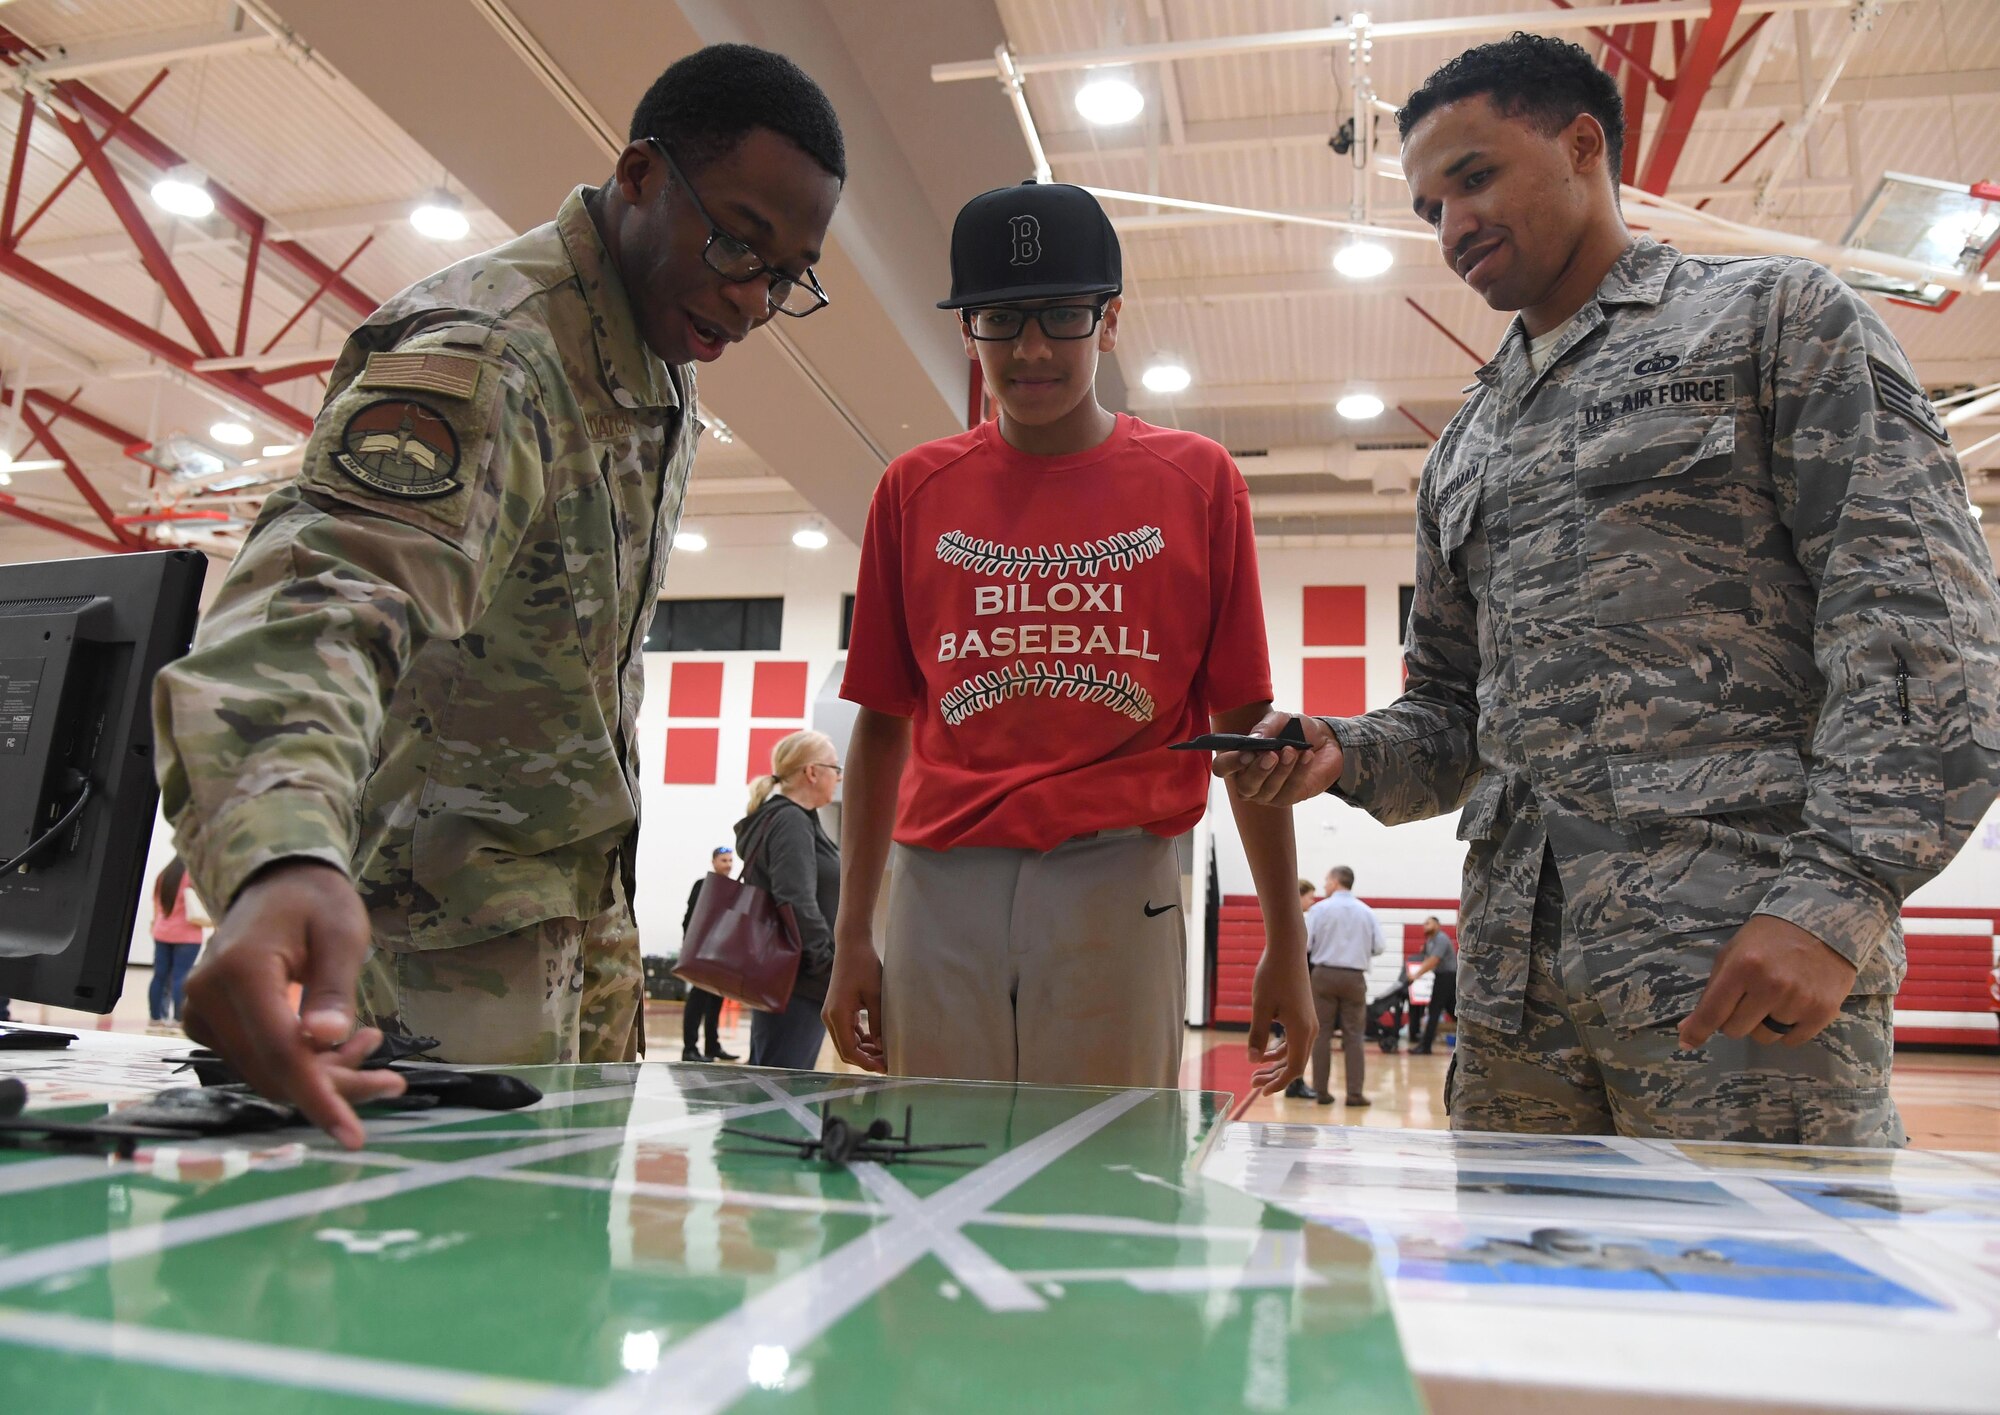 U.S. Air Force Staff Sgts. Nathaniel DeLoatch and LeAnthony Bosserman, 334th Training Squadron instructors, provide Carlos Hurtado, Jr., Biloxi Junior High School student, with an air traffic control training demonstration during the Biloxi Science, Technology, Engineering and Mathematics Night at the Biloxi Jr. High School gymnasium, Biloxi, Mississippi, Feb. 11, 2020. The entire Biloxi school district was invited to the event which promoted STEM. Seven career fields from Keesler's 81st Training Wing and the 81st Training Group participated in the event. (U.S. Air Force photo by Kemberly Groue)